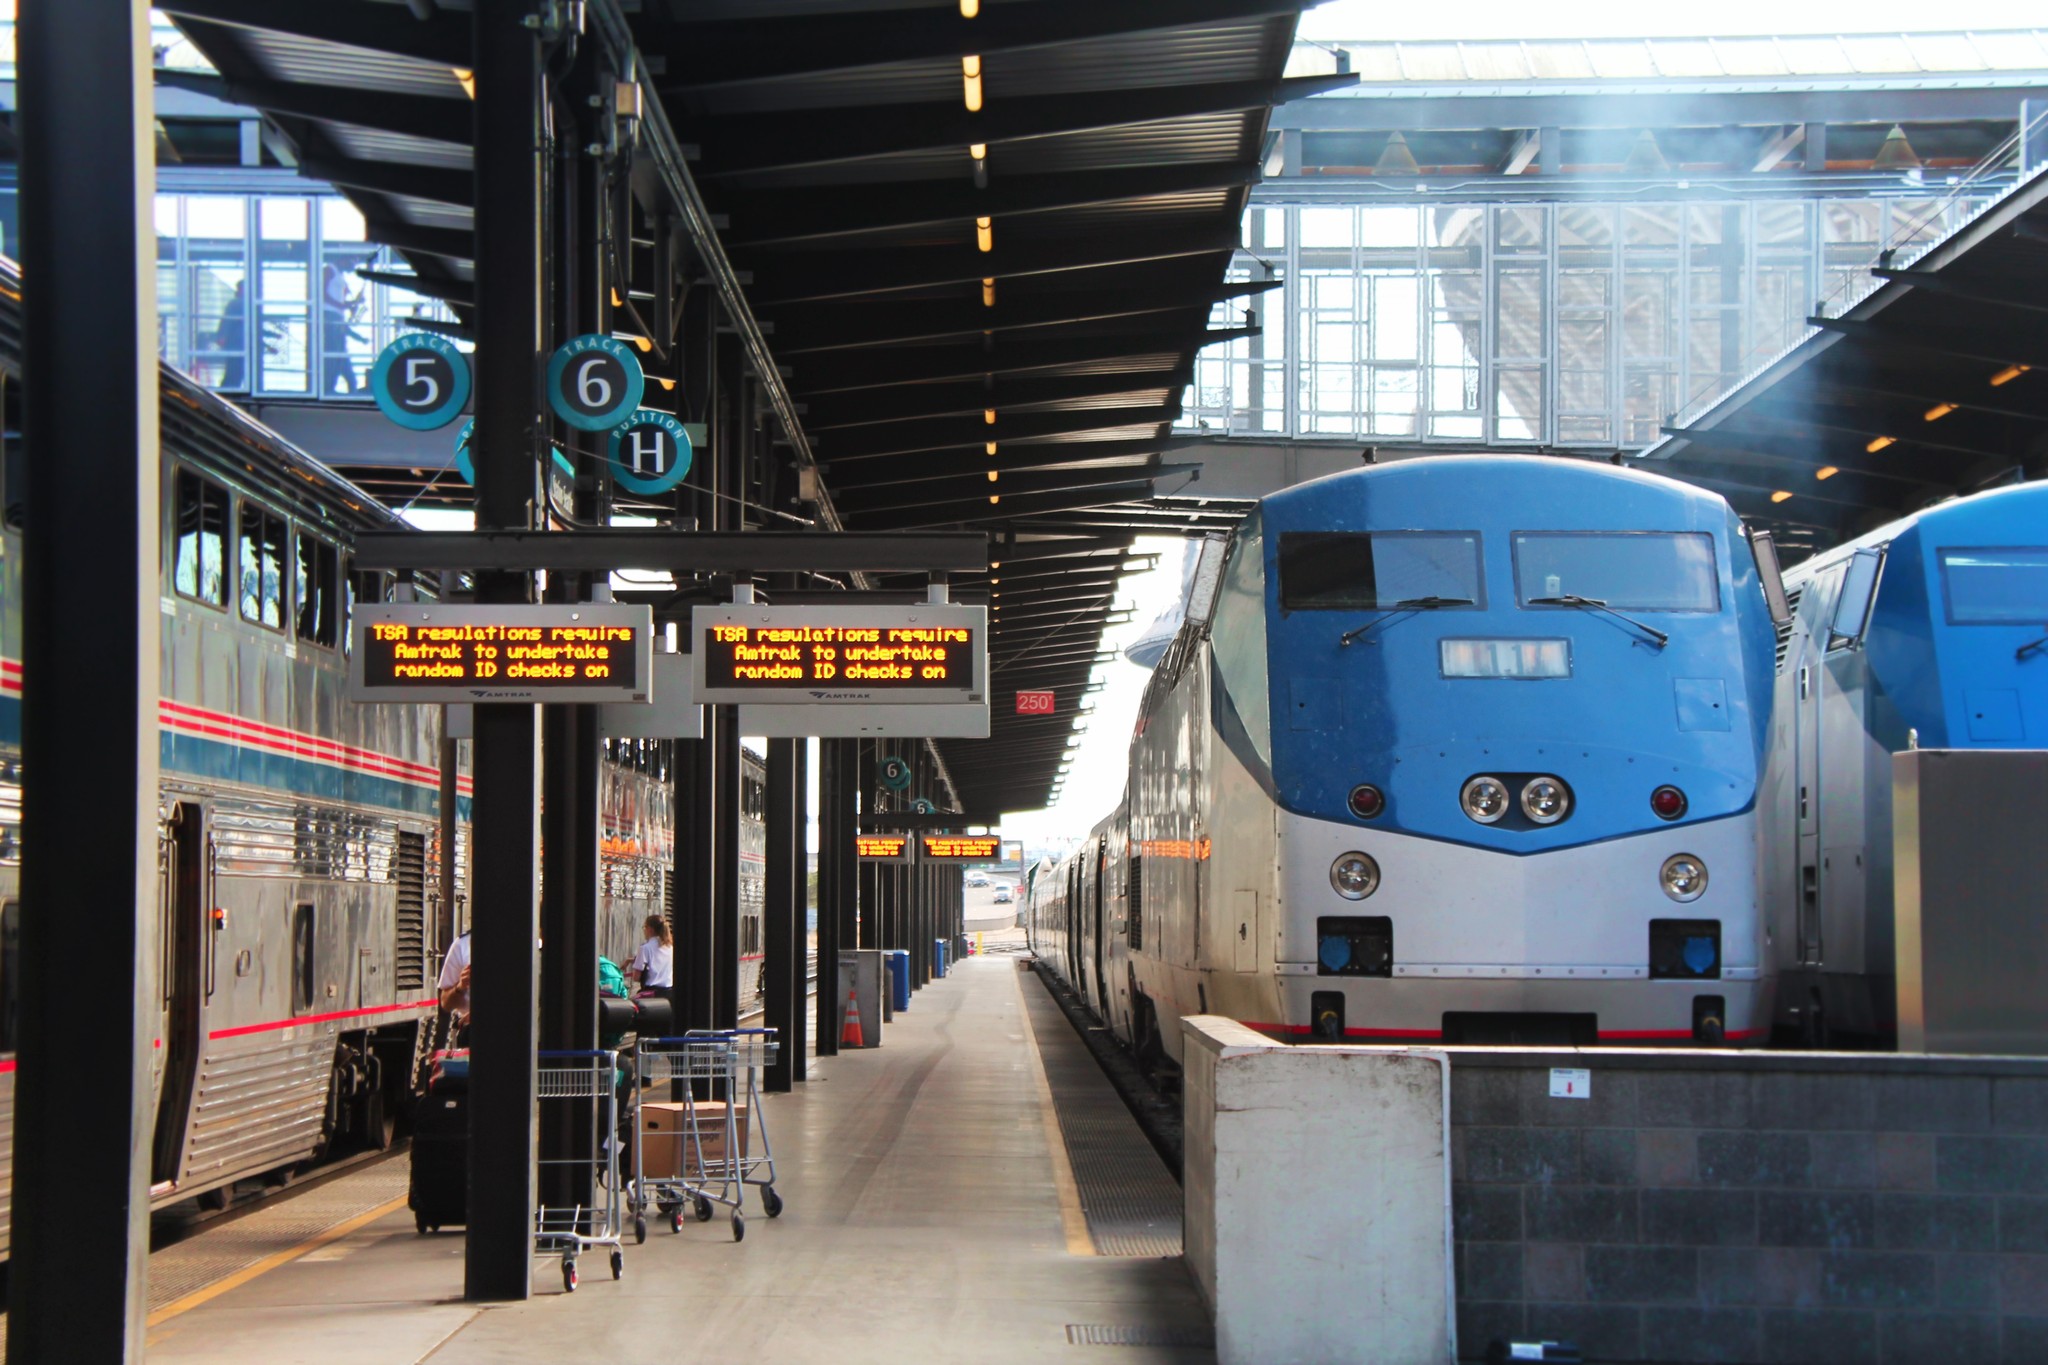 USD 1.4 billion funding for rail infrastructure projects in the US